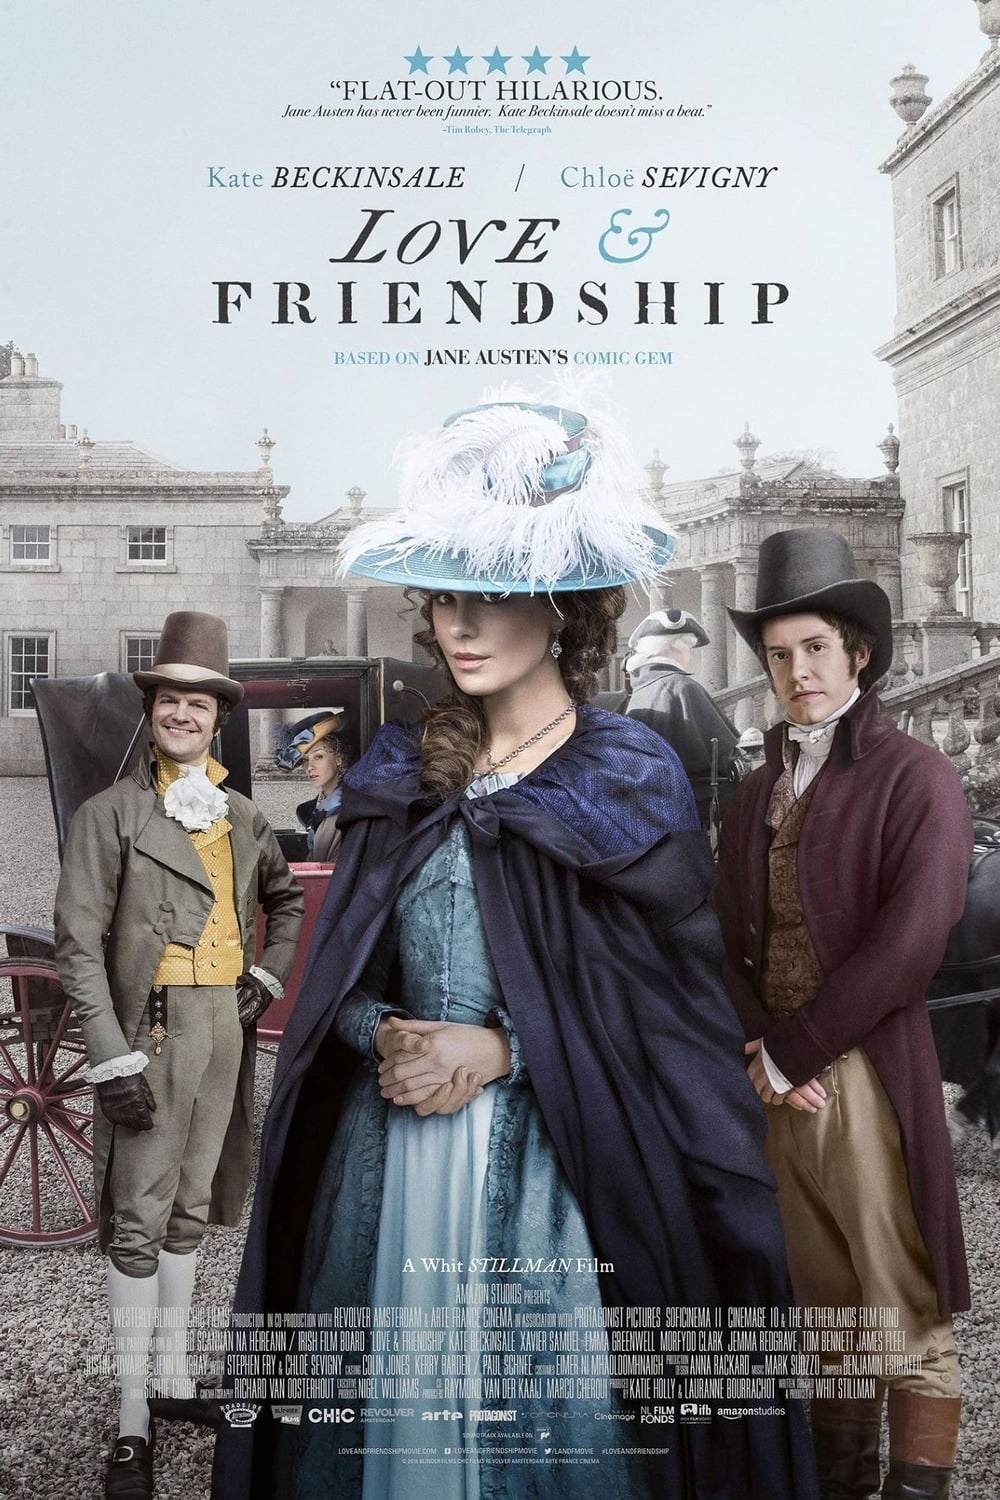 Poster for the movie "Love & Friendship"